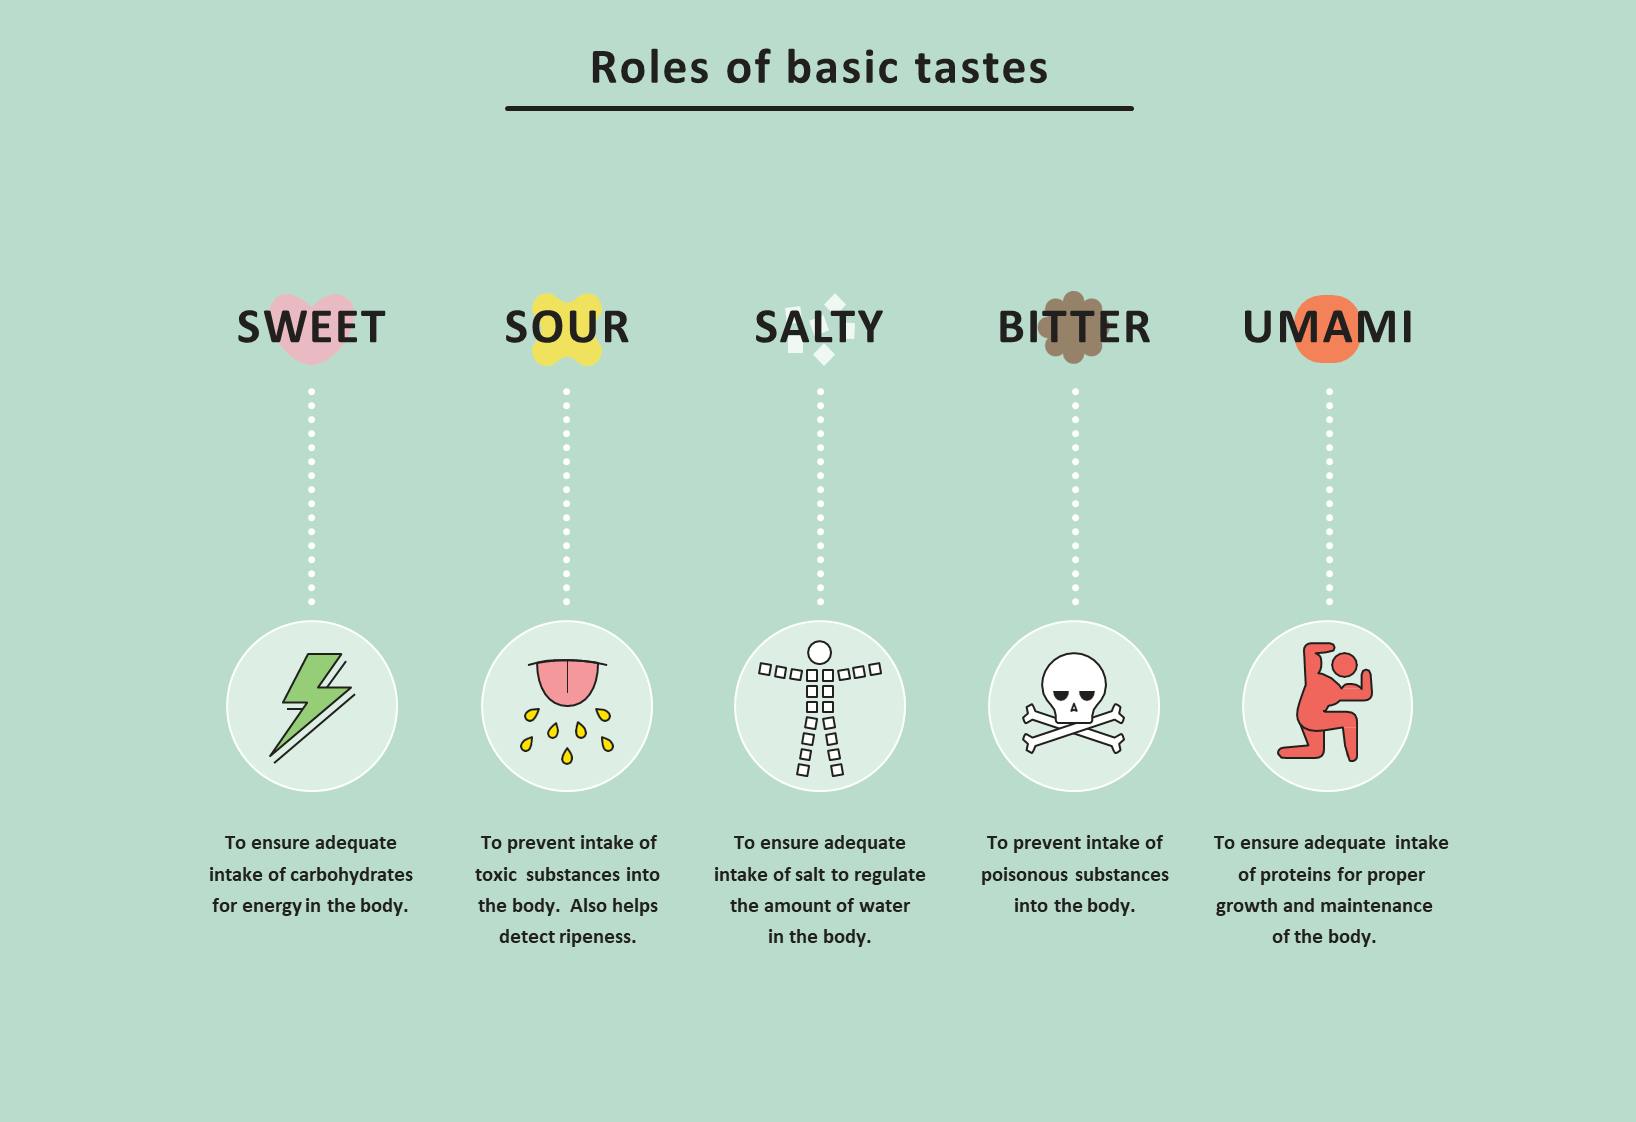 Roles of basic tastes.png